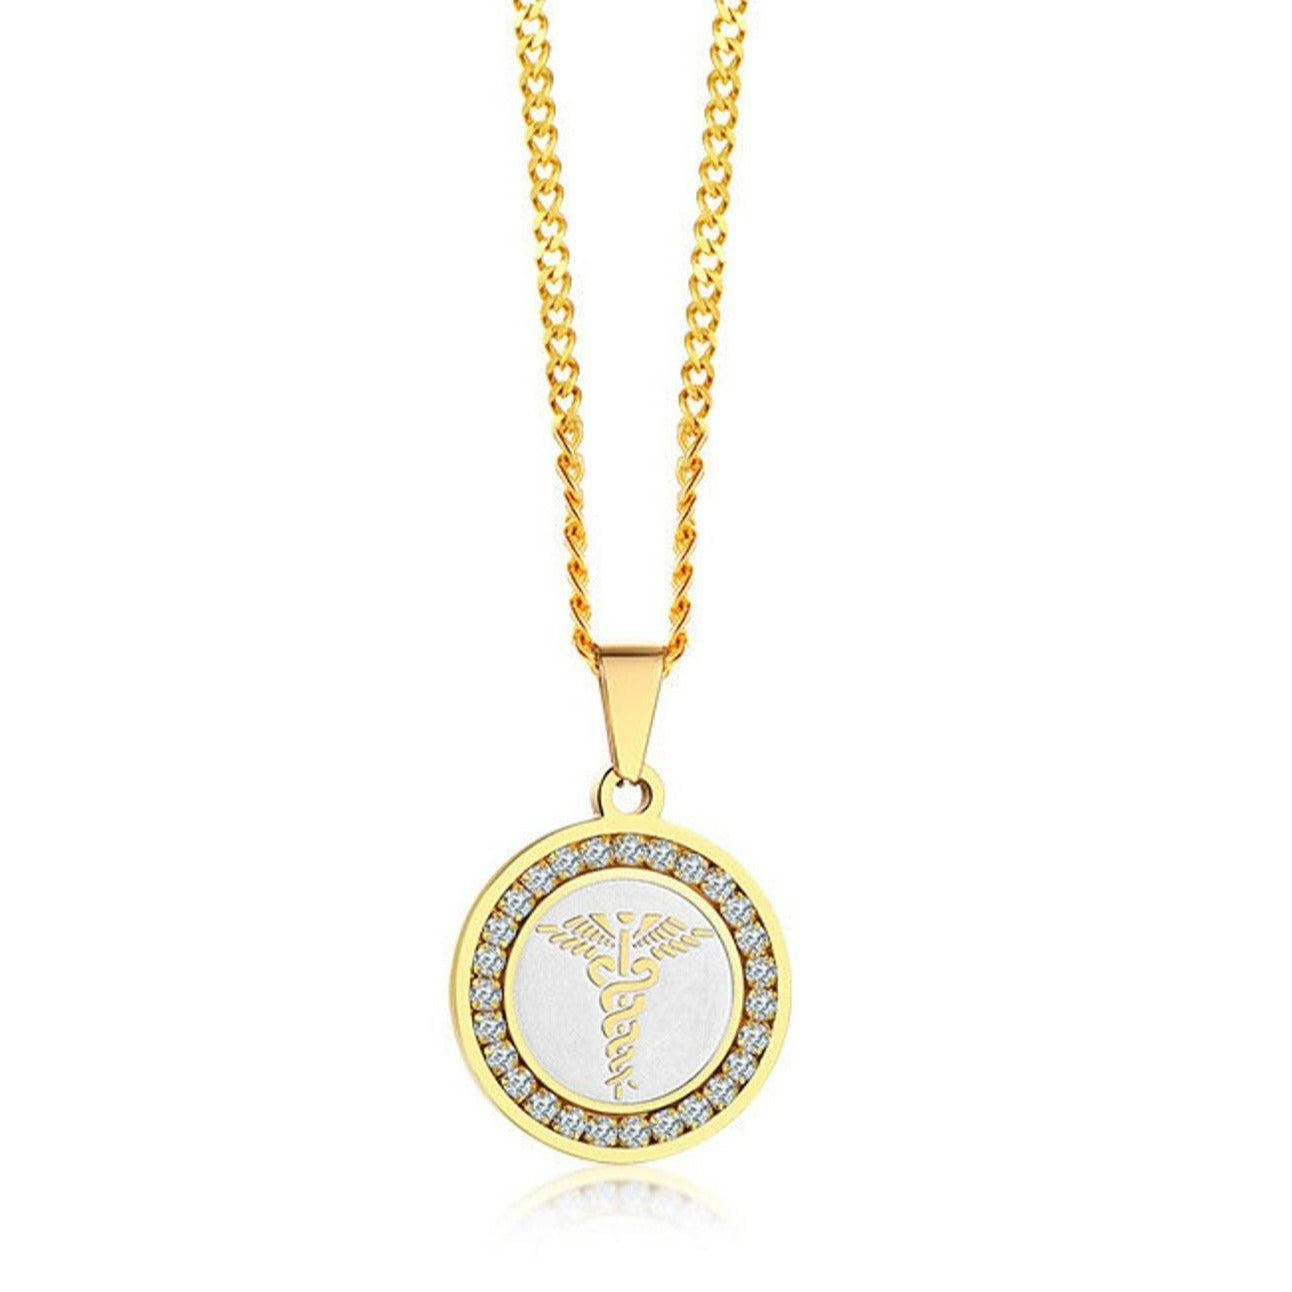 Personalised Round Medical Tag ID Necklace – Gold Colour-Medical Necklace-Auswara